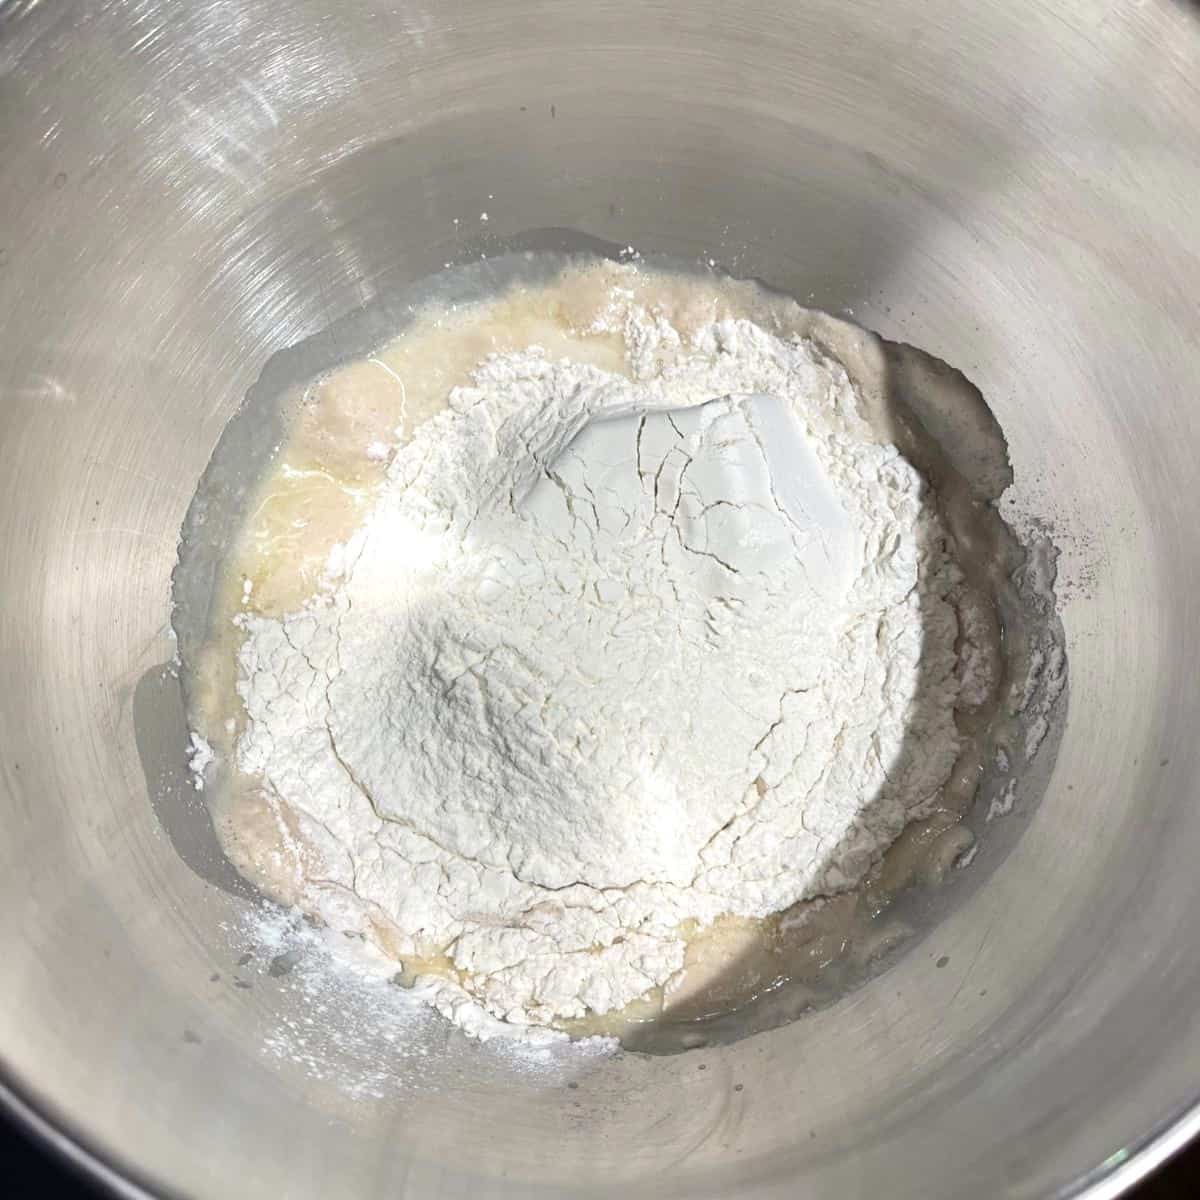 Flour added to bowl with yeast and soymilk mixture.